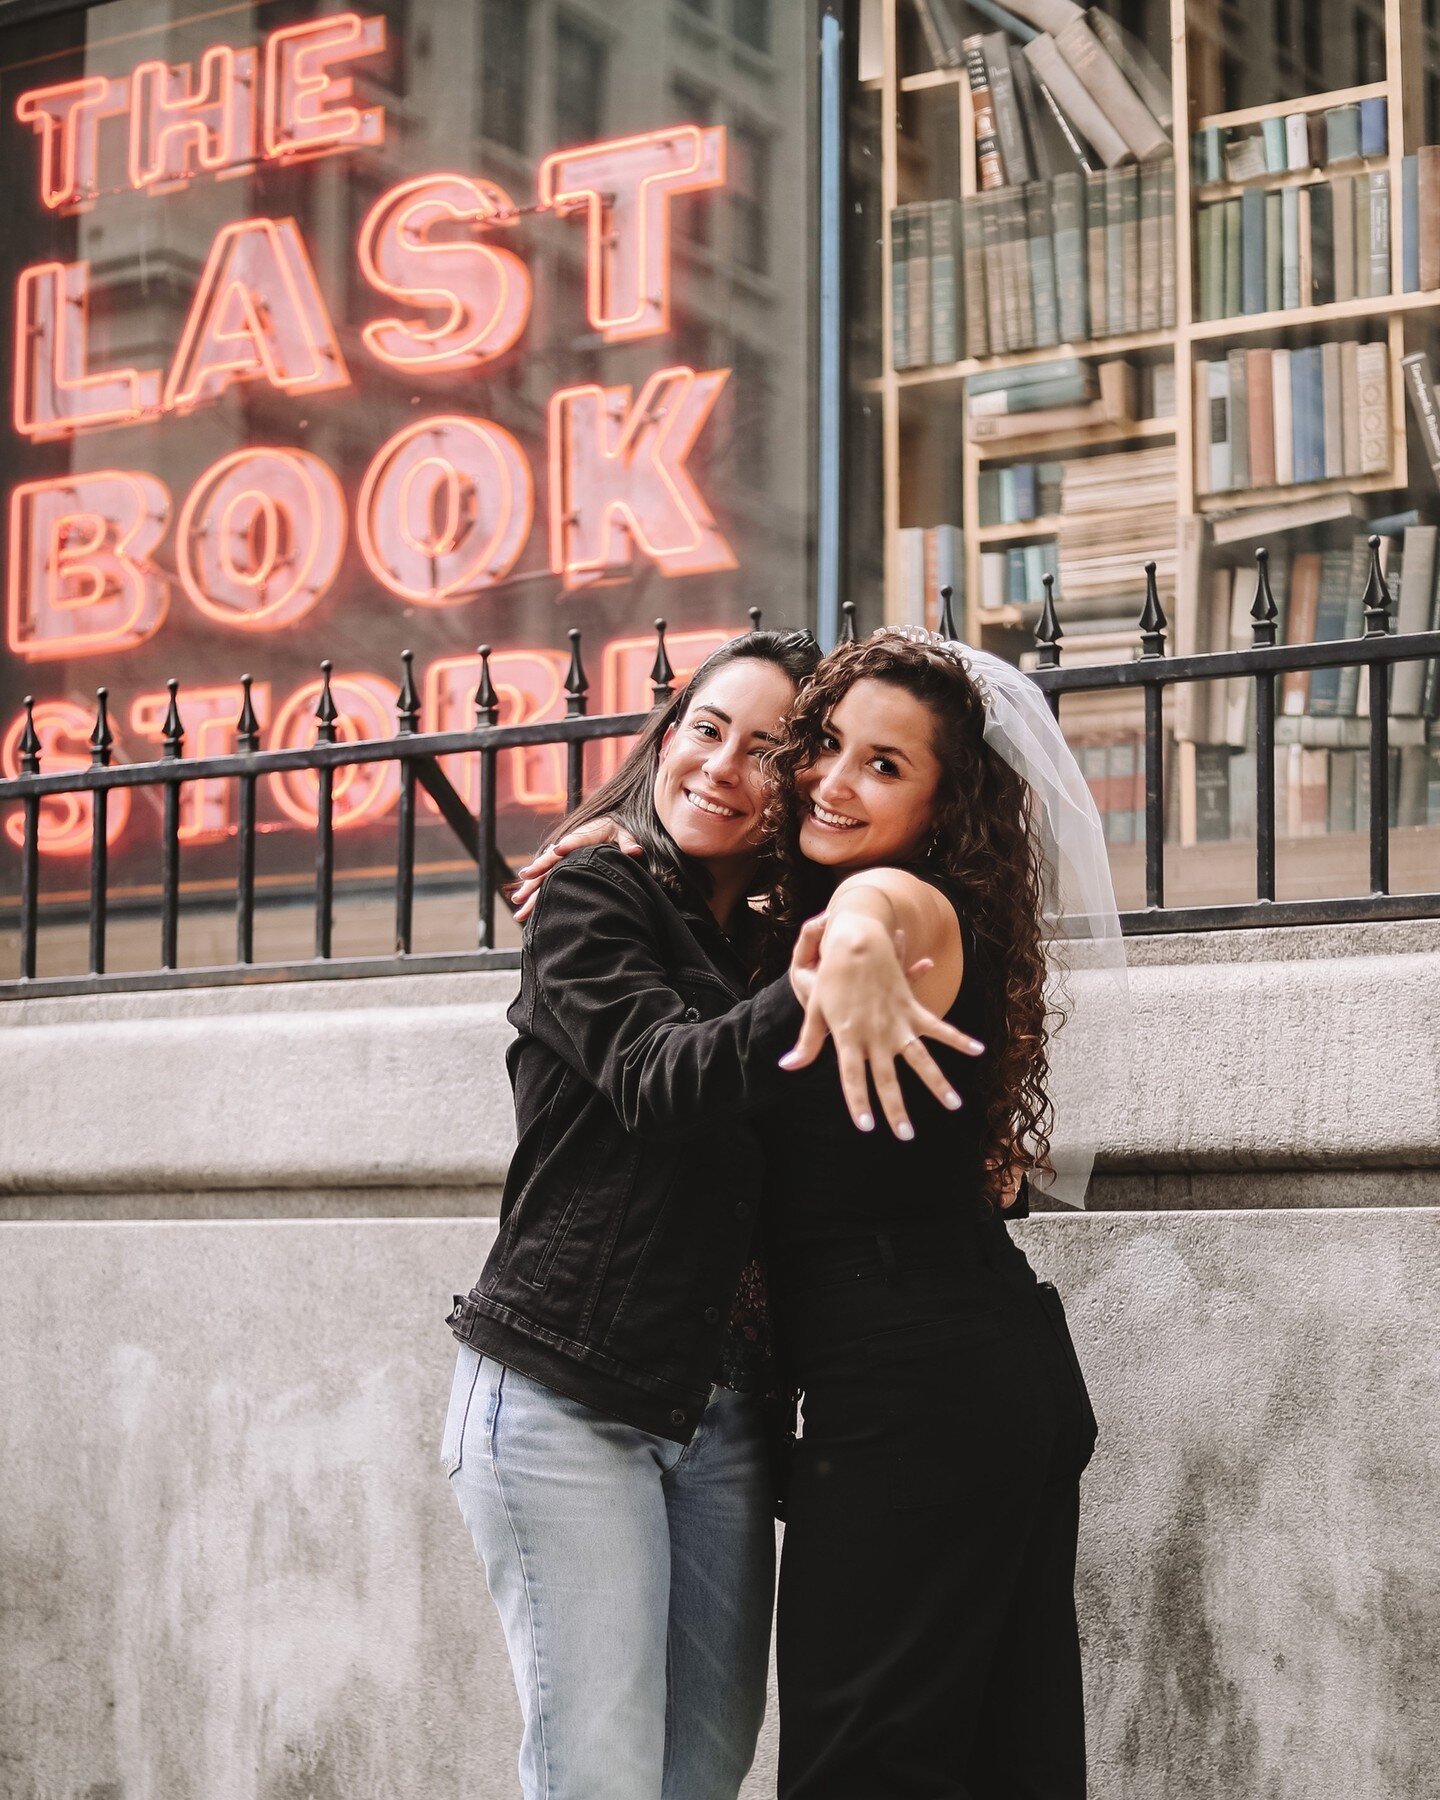 Nothing better than having your best friend there for your most important moments 🥹

&bull;
&bull;
&bull;
#engagementphotos #dtla #bestfriends #laphotographer #portraitinspiration #envisiontones, #dynamicportraits #moodyfilm #portraitmobs #portrait_